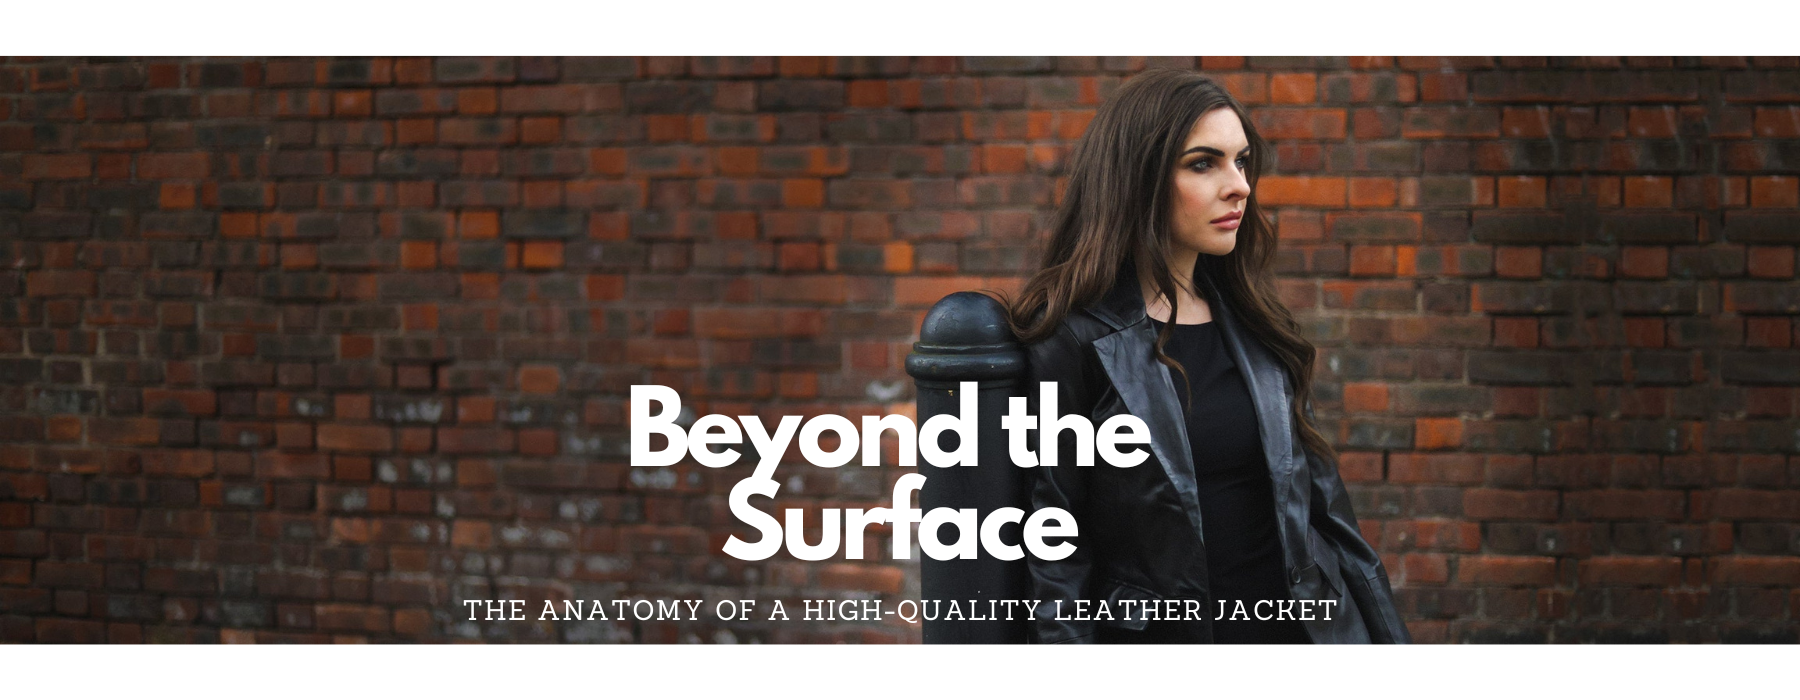 Beyond the Surface: The Anatomy of a High-Quality Leather Jacket